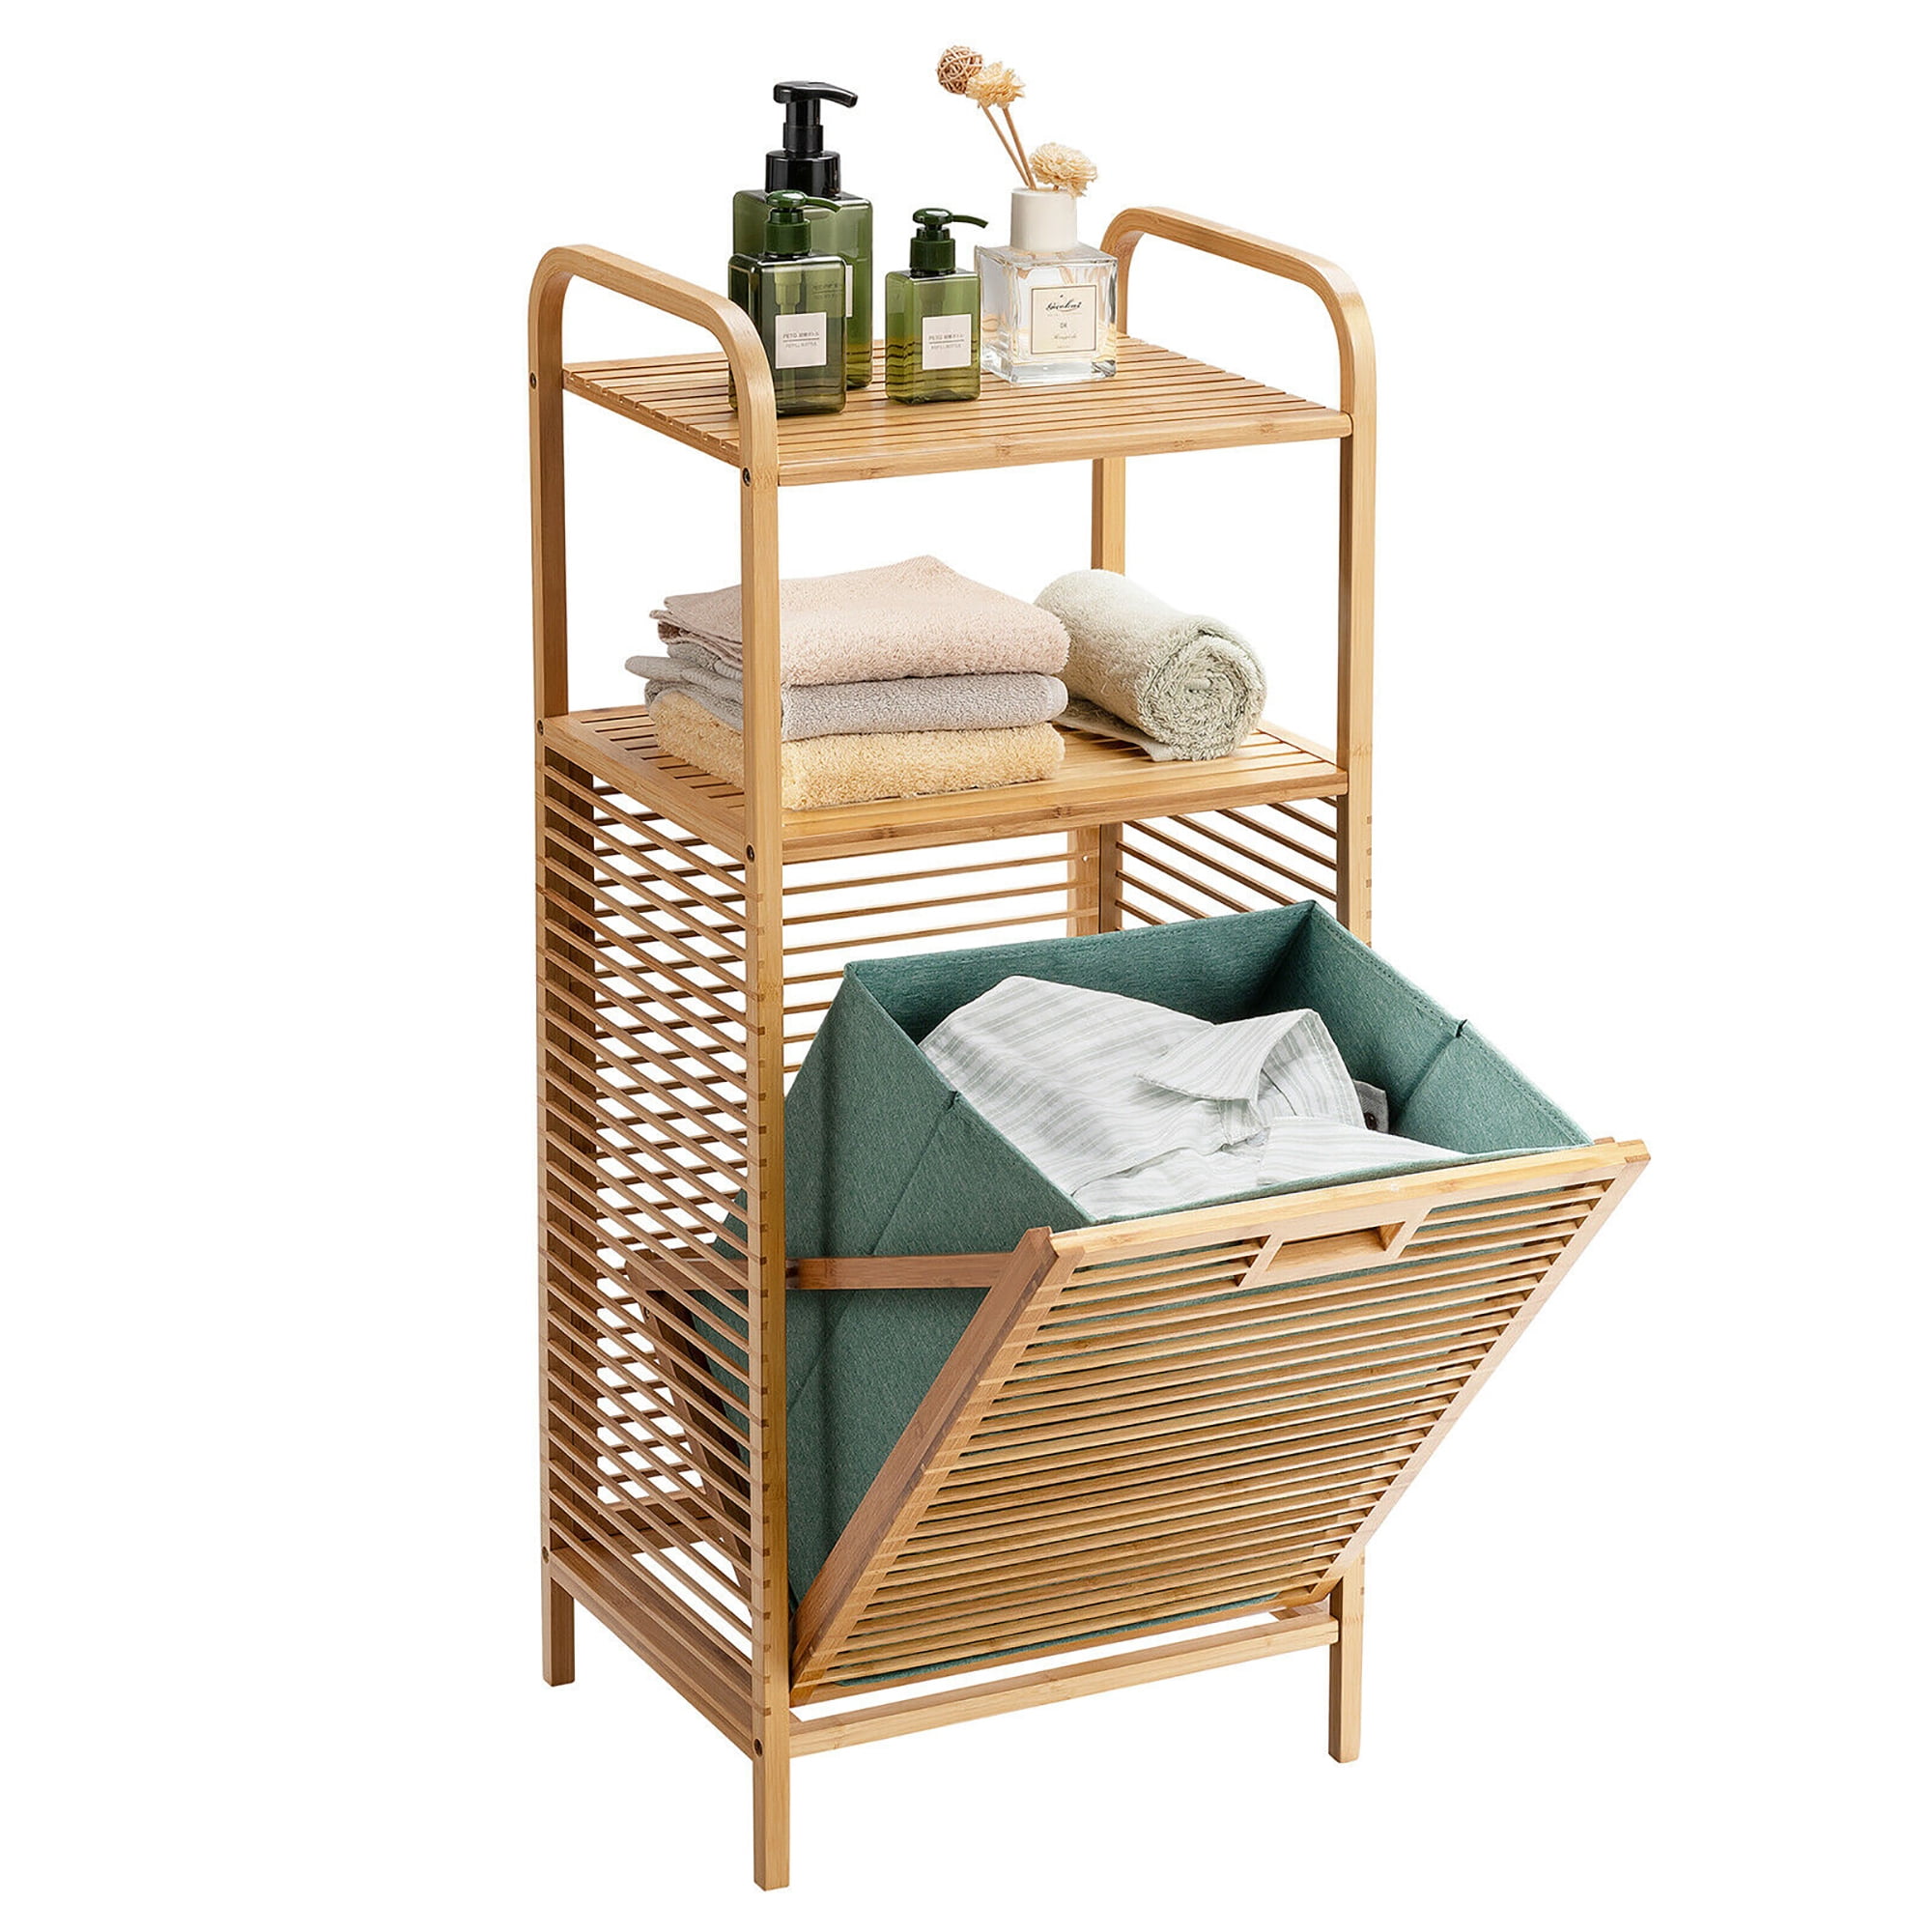 Details about   Laundry Hamper With Lid Bathroom Organizer wood 2 Loads Storage Multiple colors 